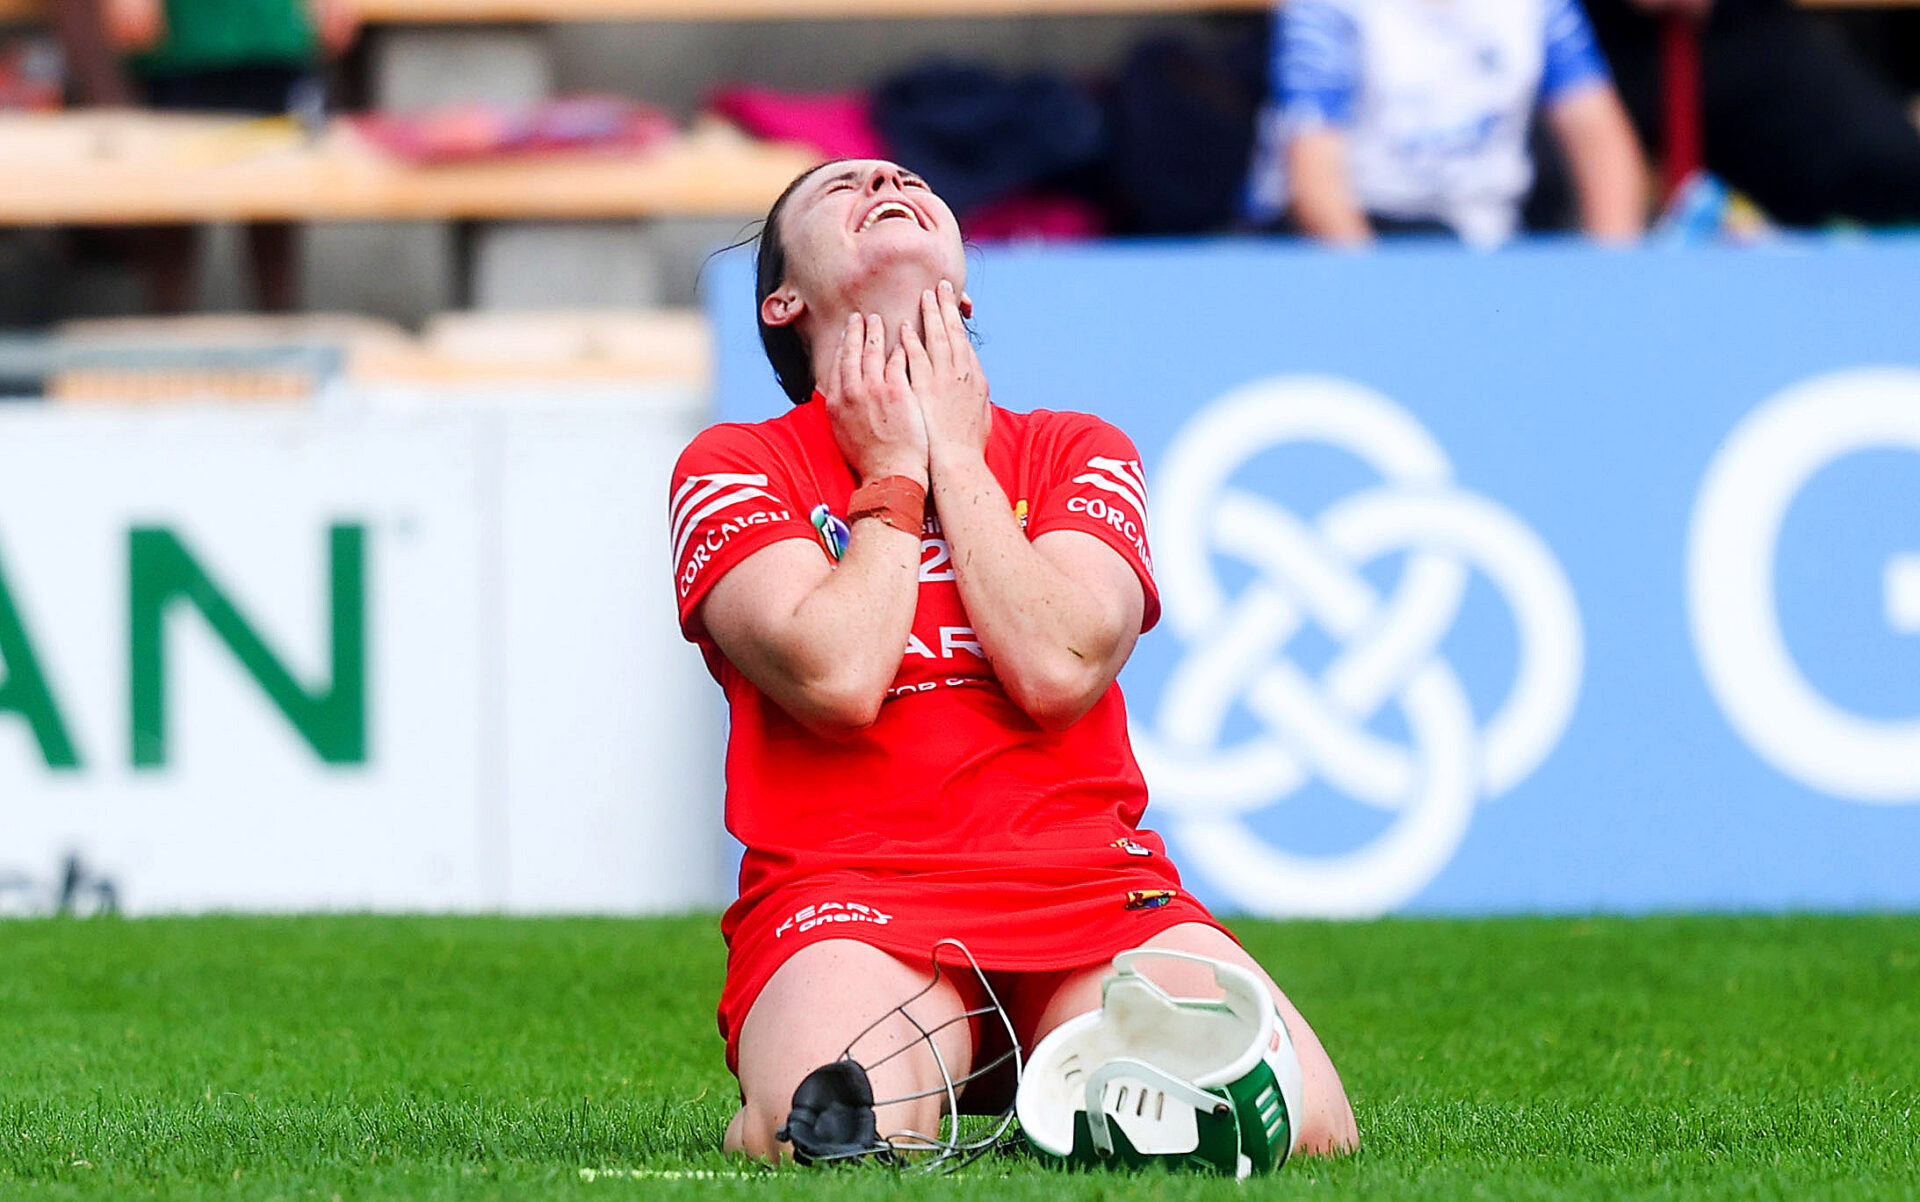 REPORT: Cork grind it out against Galway